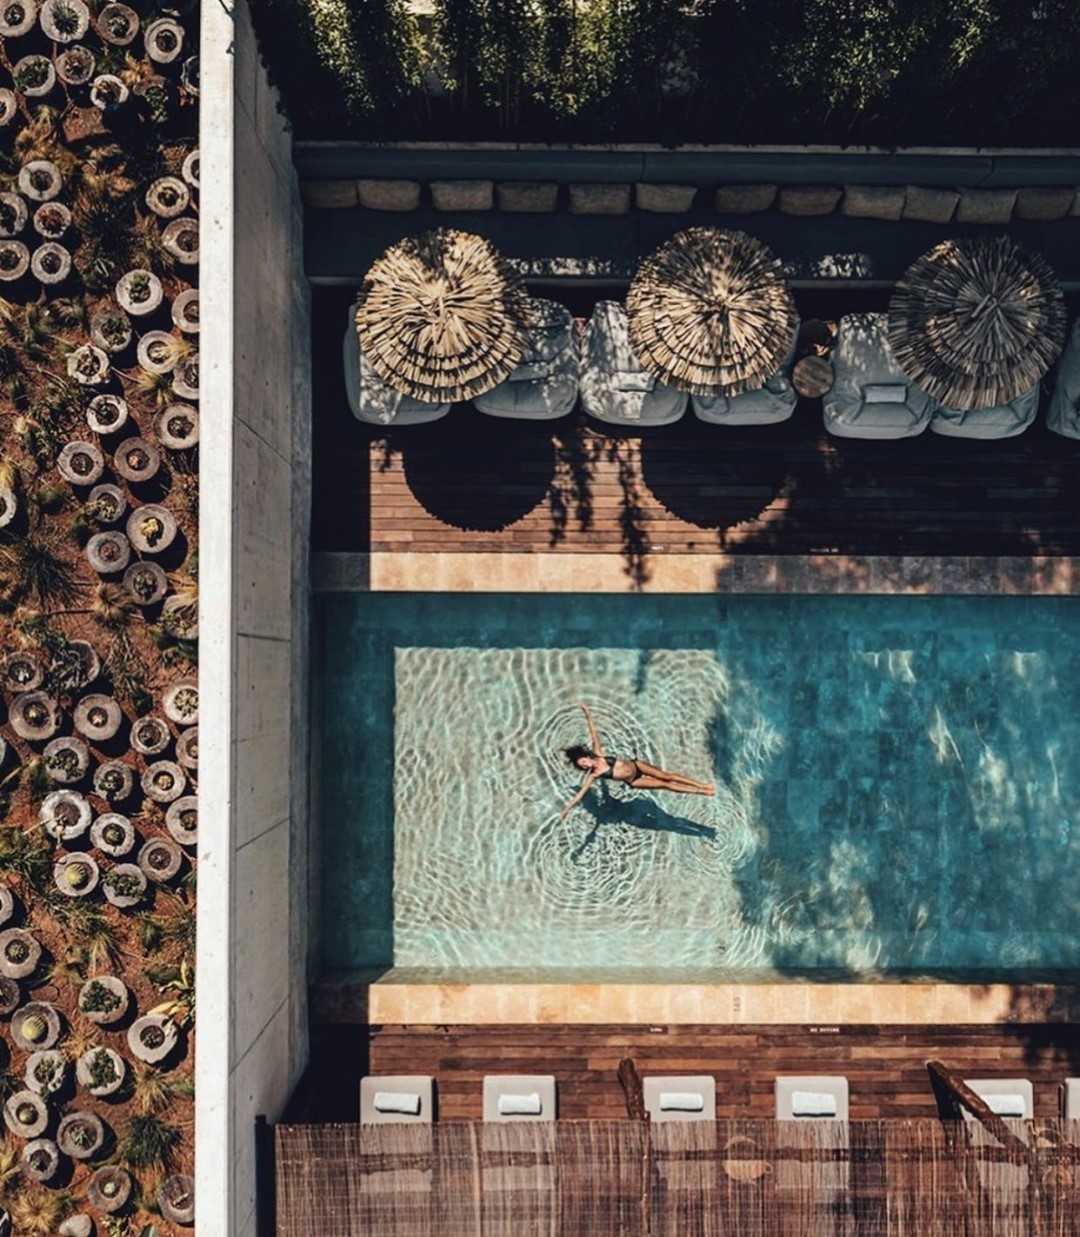 Charo Ruiz Ibiza - An amazing picture of @georg_roske taken from his visual diary of his work during his latest visit to Ibiza. #ibiza #ibiza2020 #pool #floating #wellness #georgroskephotography